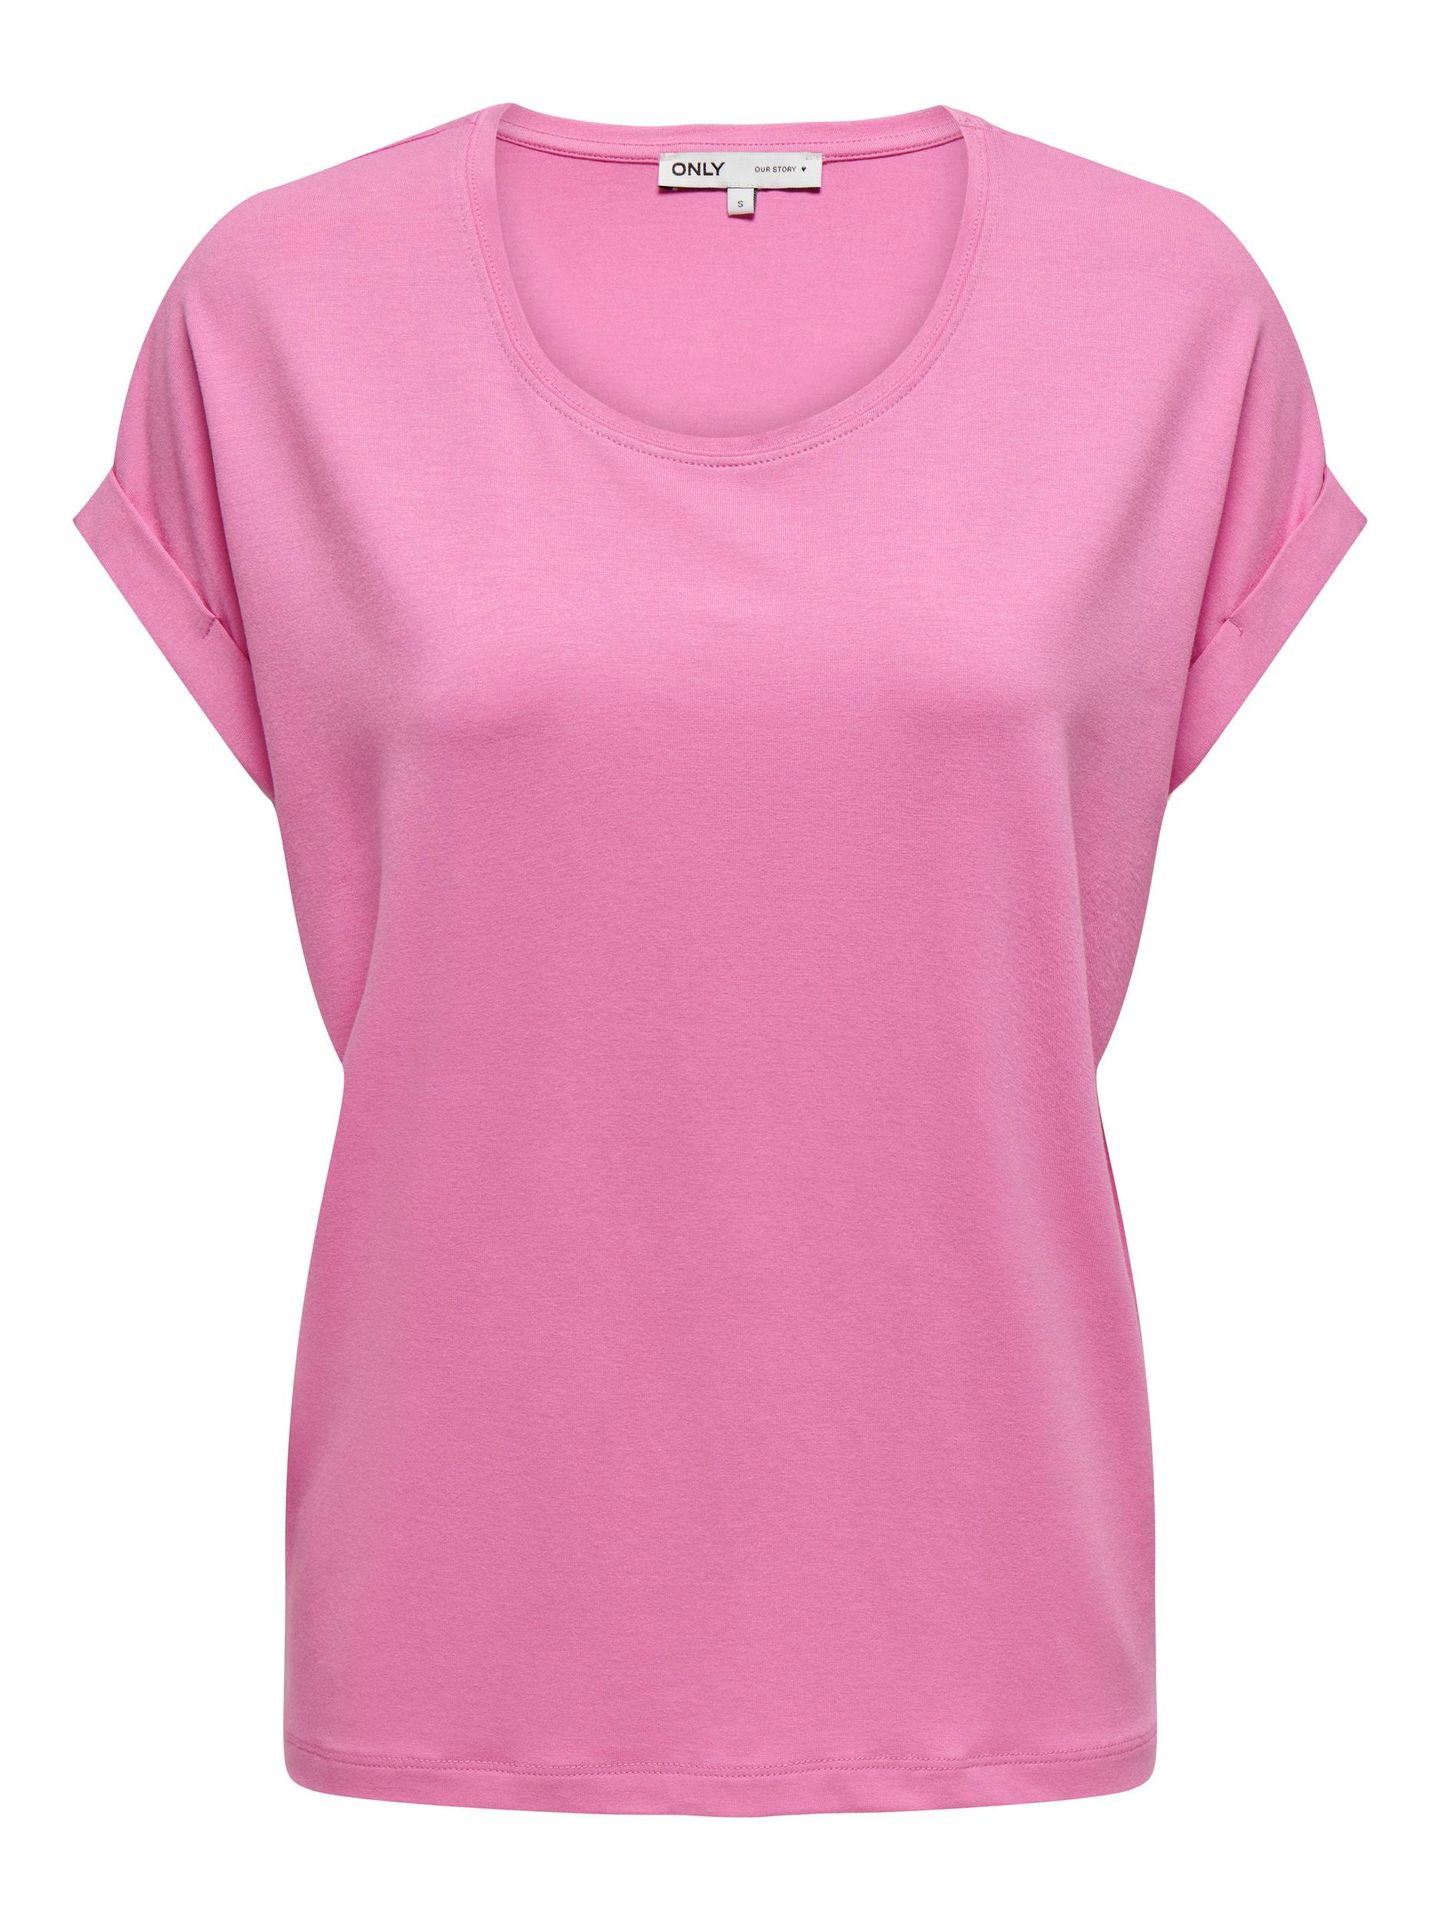 Only ONLMOSTER S/S O-NECK TOP NOOS JRS Fuchsia Pink 00101963-EKA26011400001577